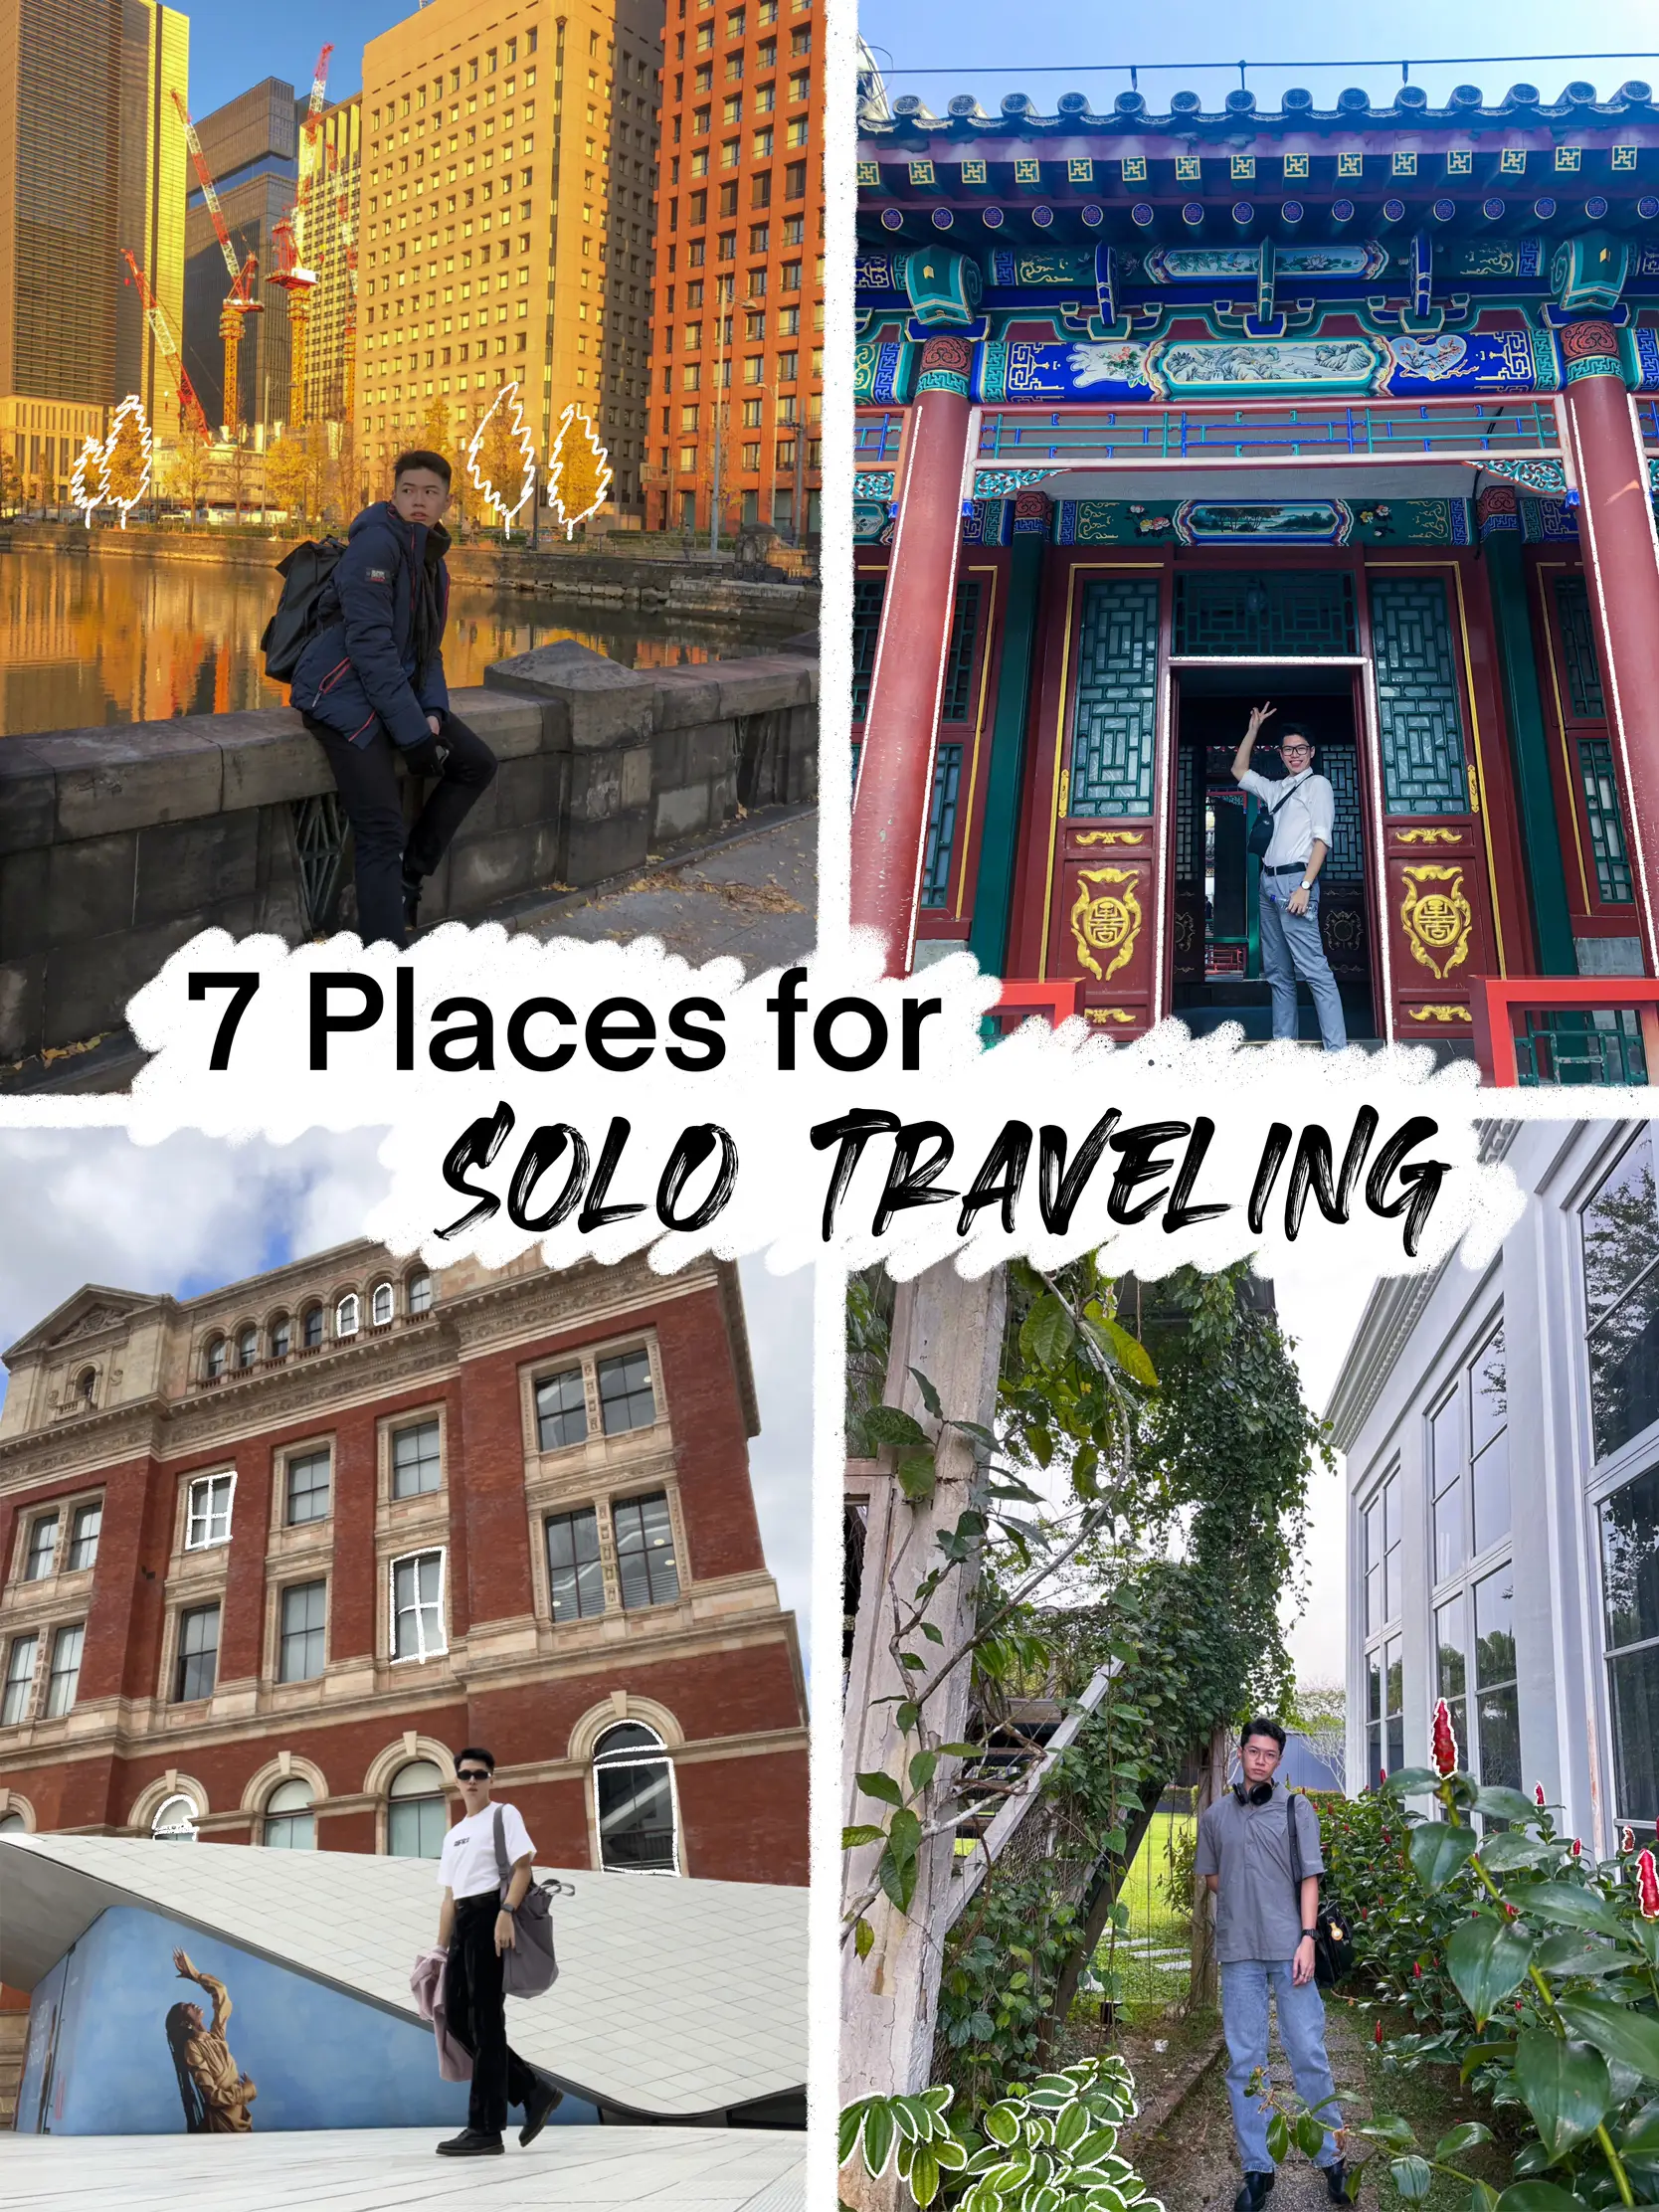 Top 7 places to Solo Travel! 's images(0)